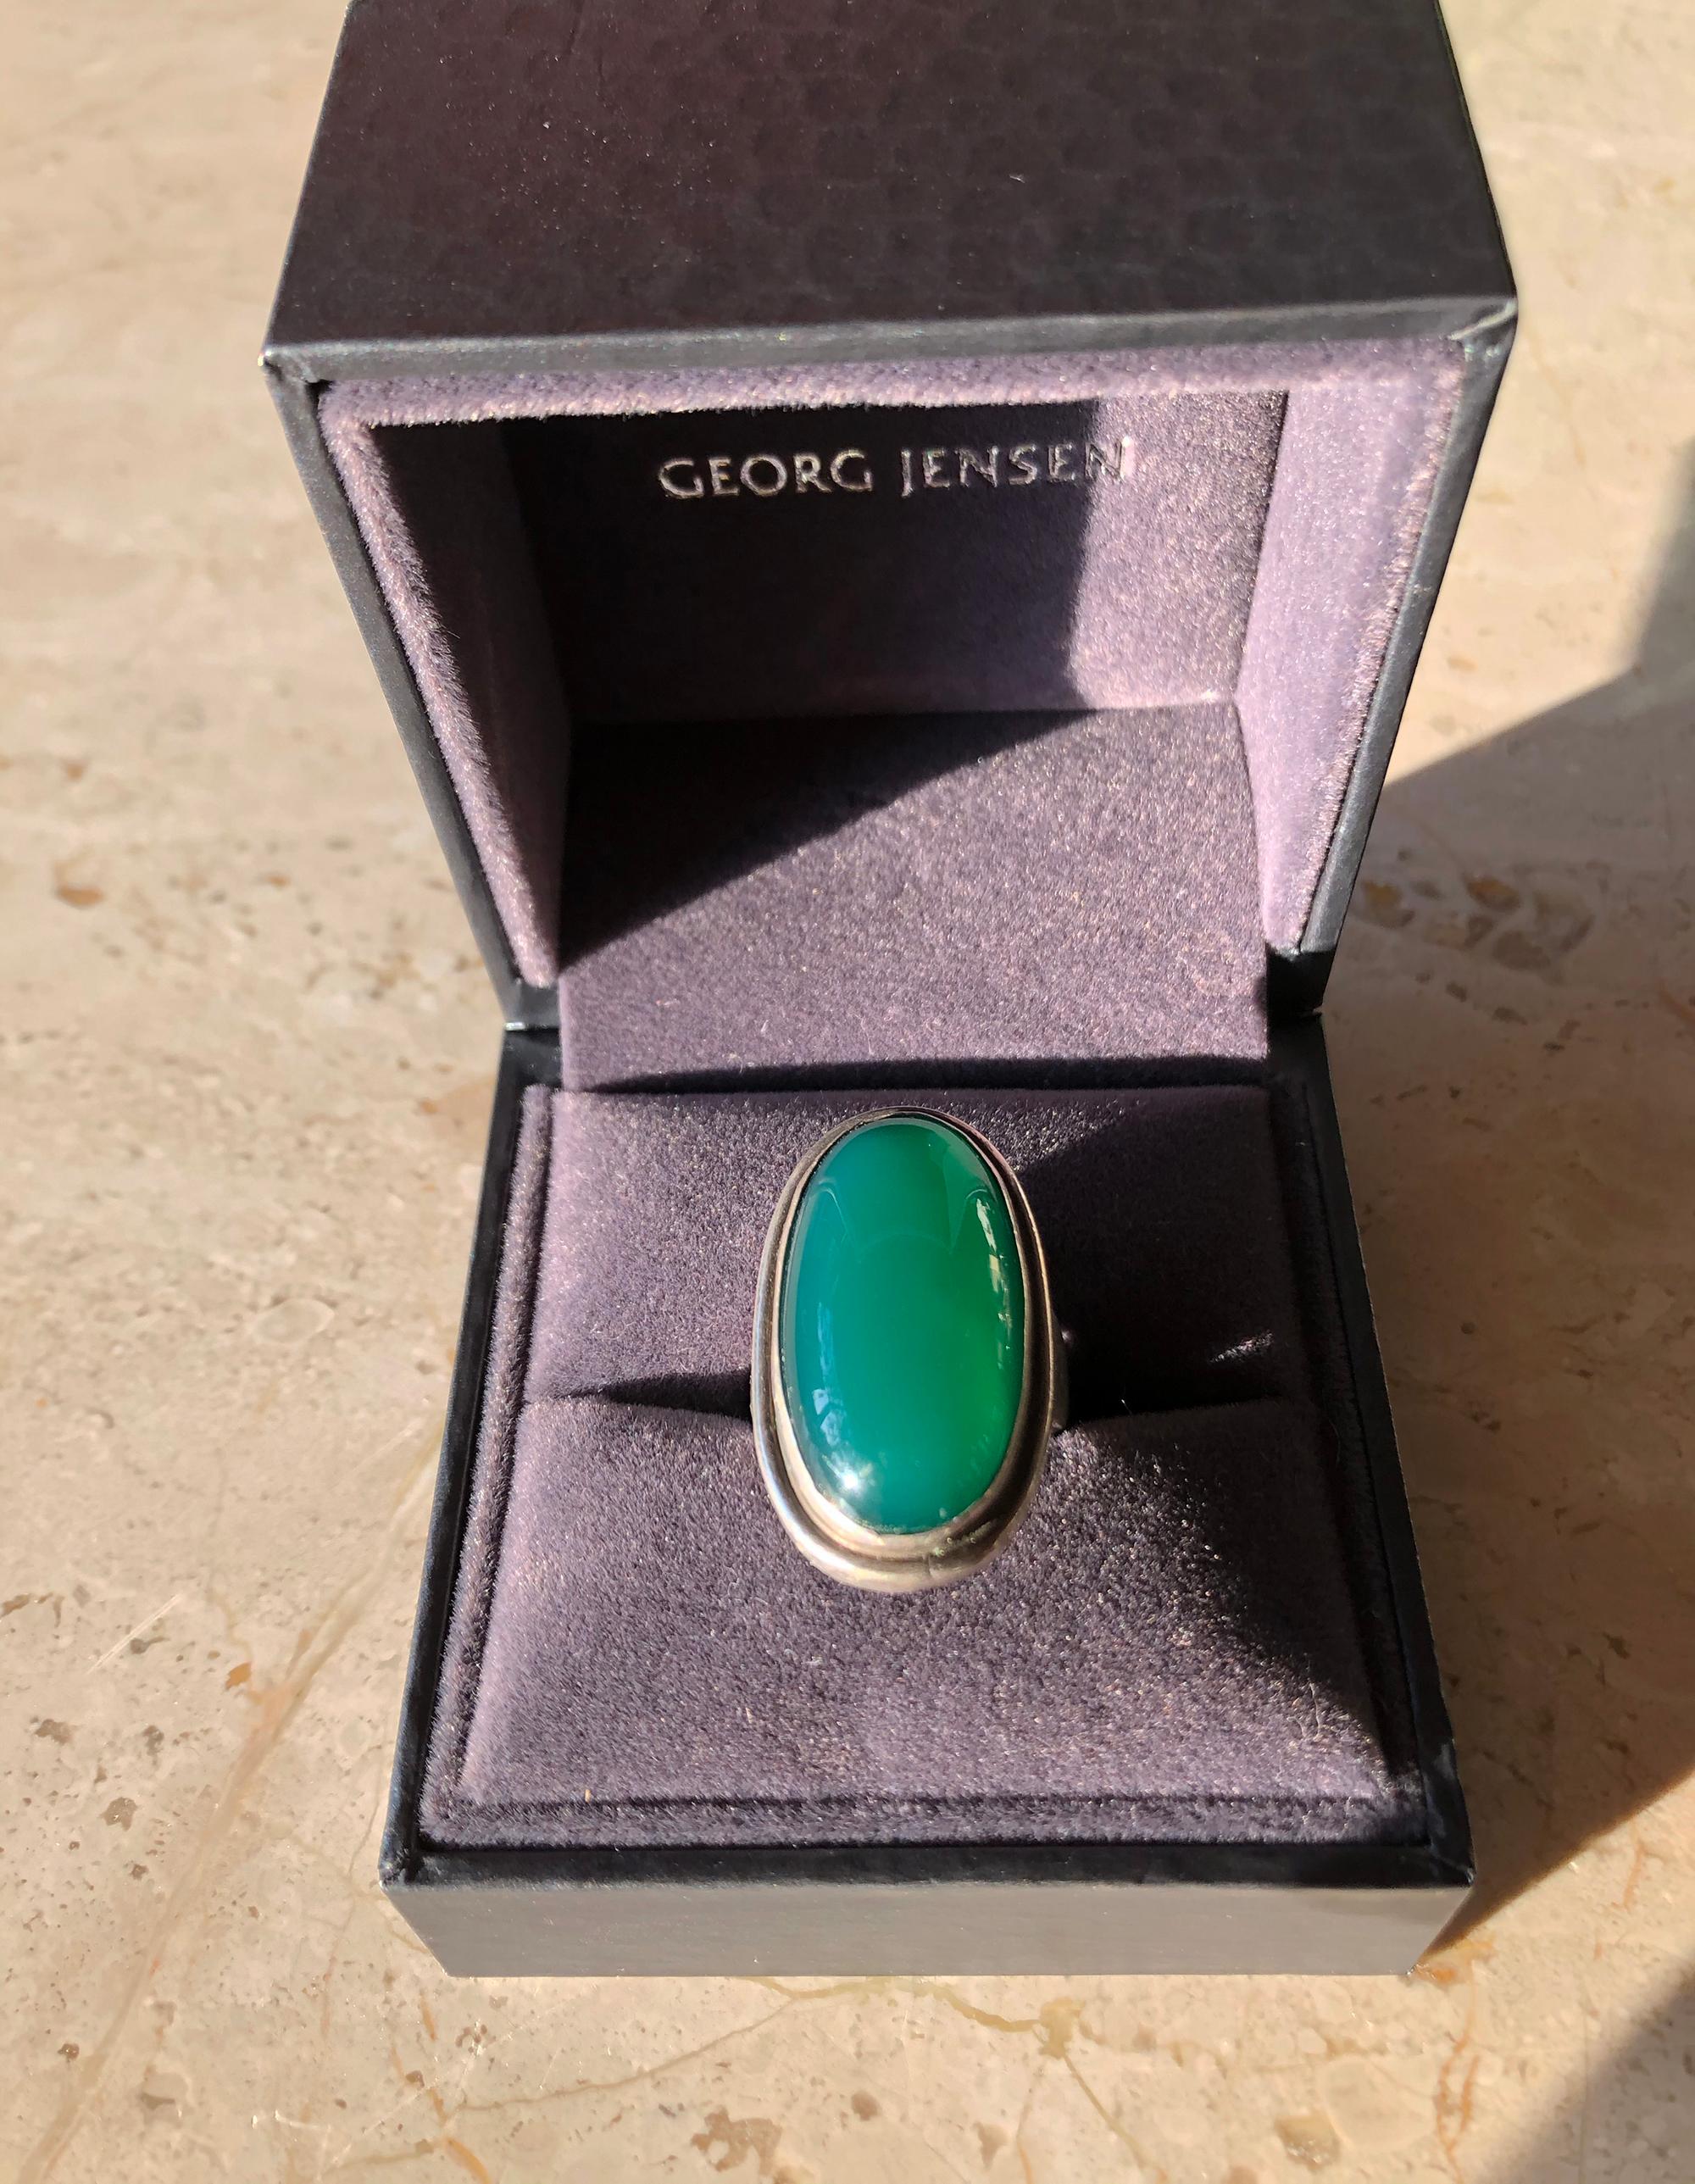 Stunning chrysoprase stone in sterling silver setting ring designed by Harald Christian Nielsen for Georg Jensen, circa 1950's.  Ring is a finger size 7 to 7.25 and is signed Georg Jensen, 46E, Denmark.  Ring comes with a Georg Jensen box as seen in